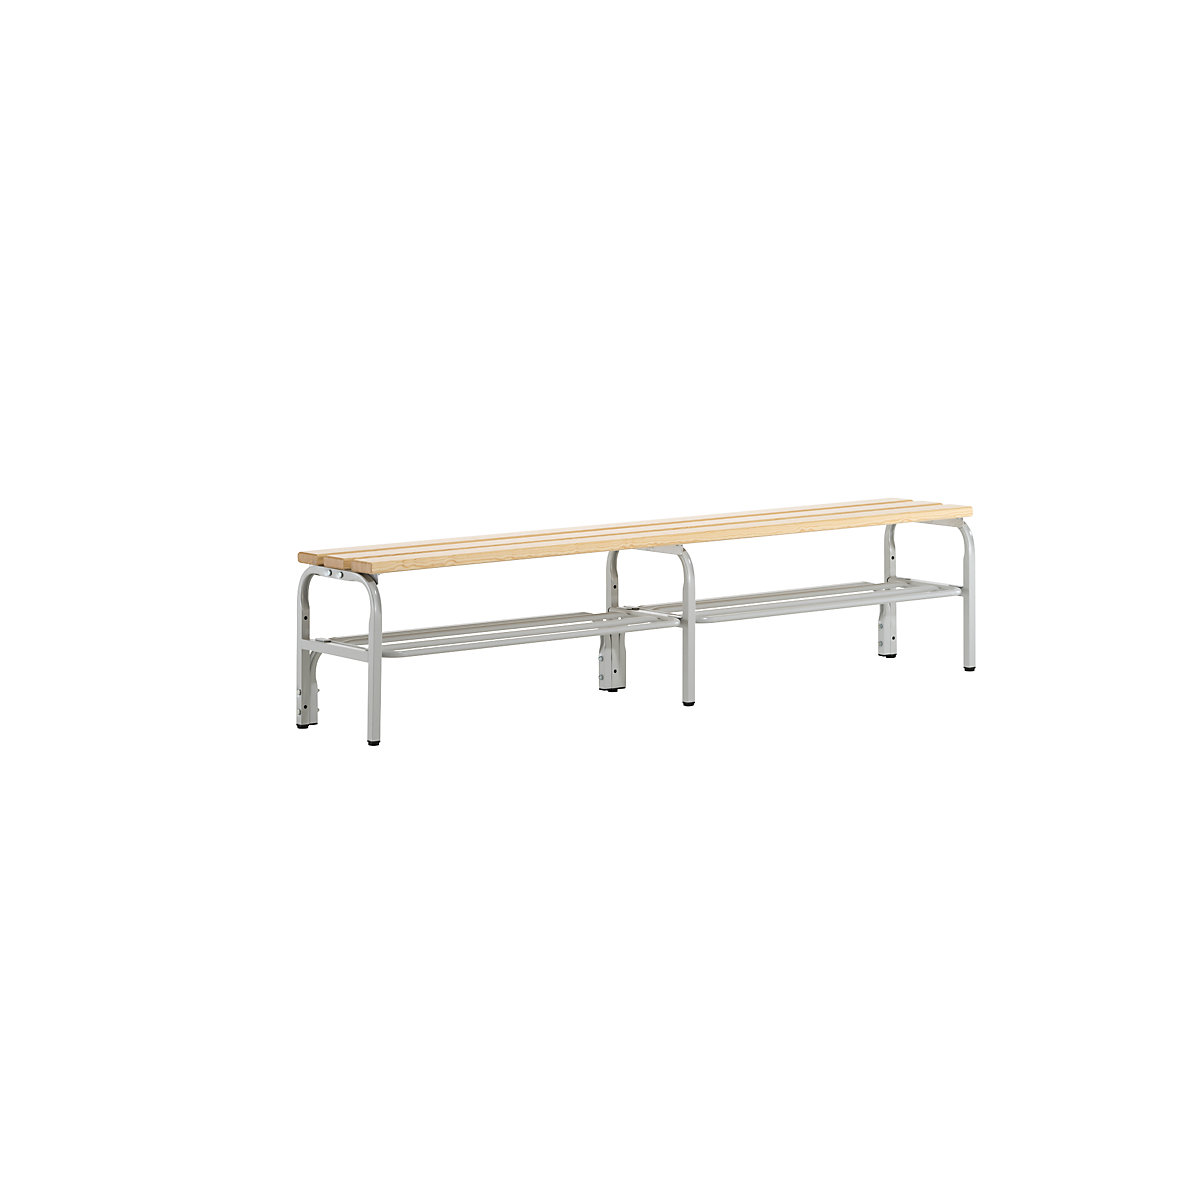 Sypro – Cloakroom bench, single sided, with shoe rack, length 1500 mm, light grey